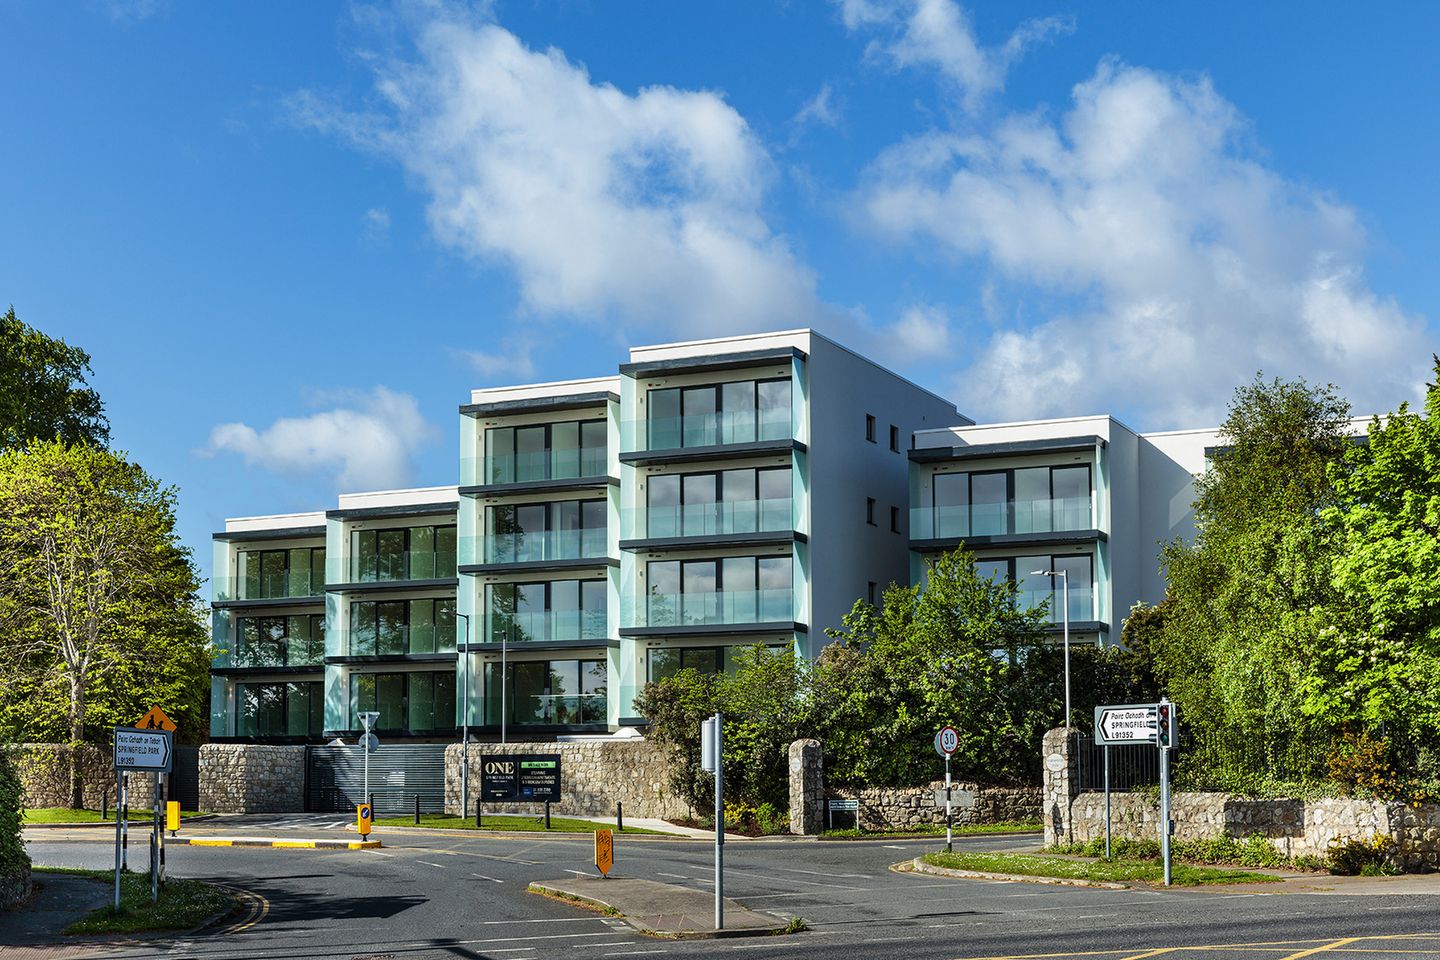 2 bedroom apartment, "Sold out" One Springfield Park, "Sold out" One Springfield Park, Foxrock, Dublin 18